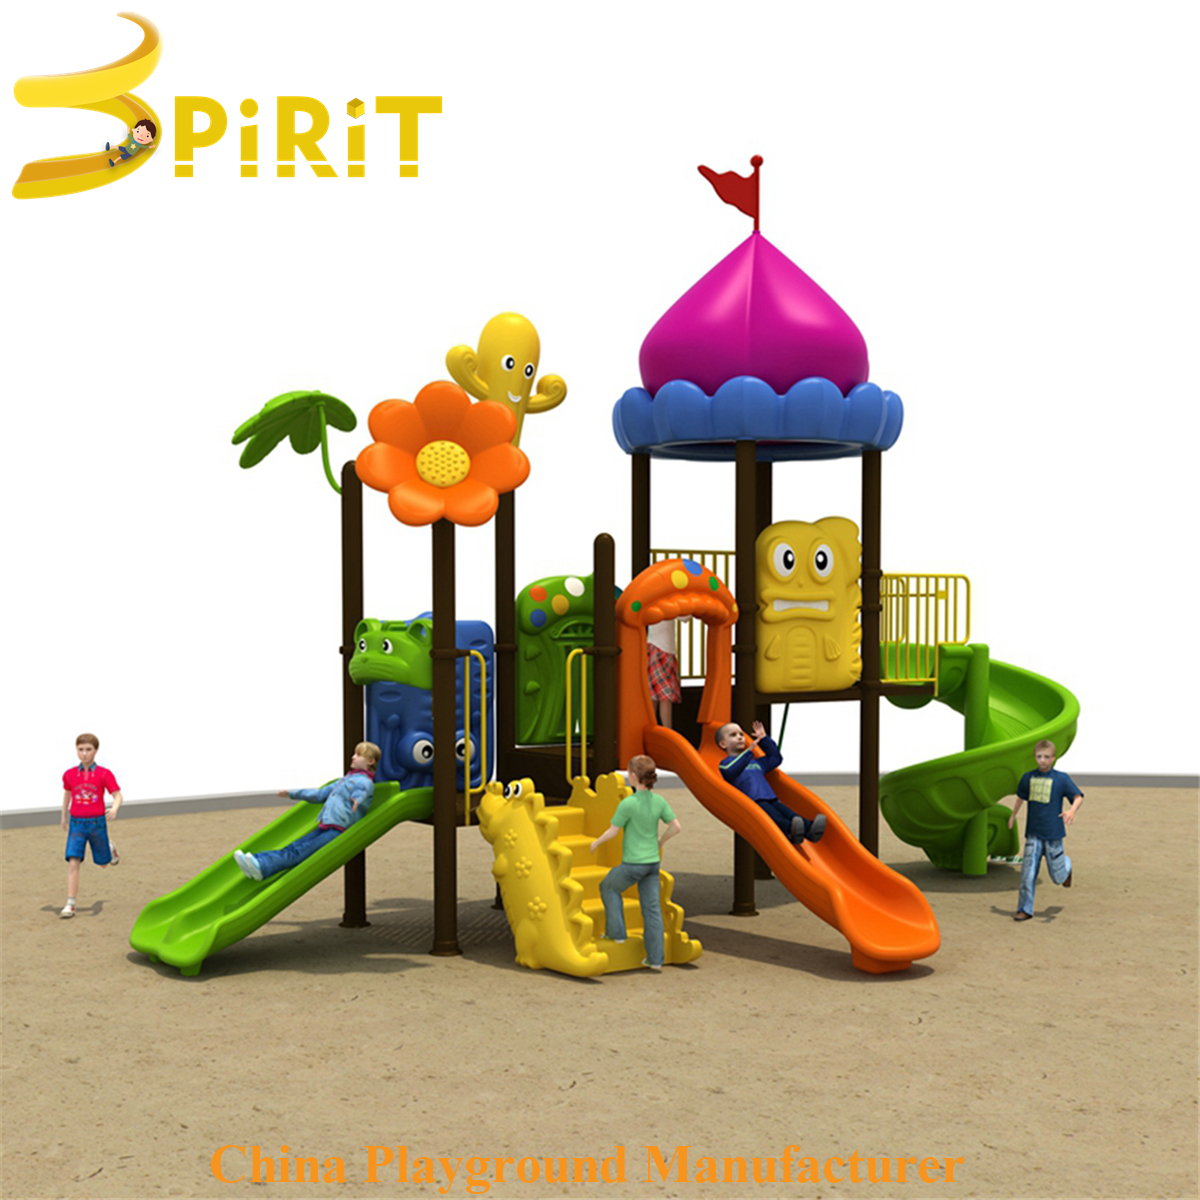 Kids play now playgrounds design for pre-school-SPIRIT PLAY,Outdoor Playground, Indoor Playground,Trampoline Park,Outdoor Fitness,Inflatable,Soft Playground,Ninja Warrior,Trampoline Park,Playground Structure,Play Structure,Outdoor Fitness,Water Park,Play System,Freestanding,Interactive,independente ,Inklusibo, Park, Pagsaka sa Bungbong, Dula sa Bata